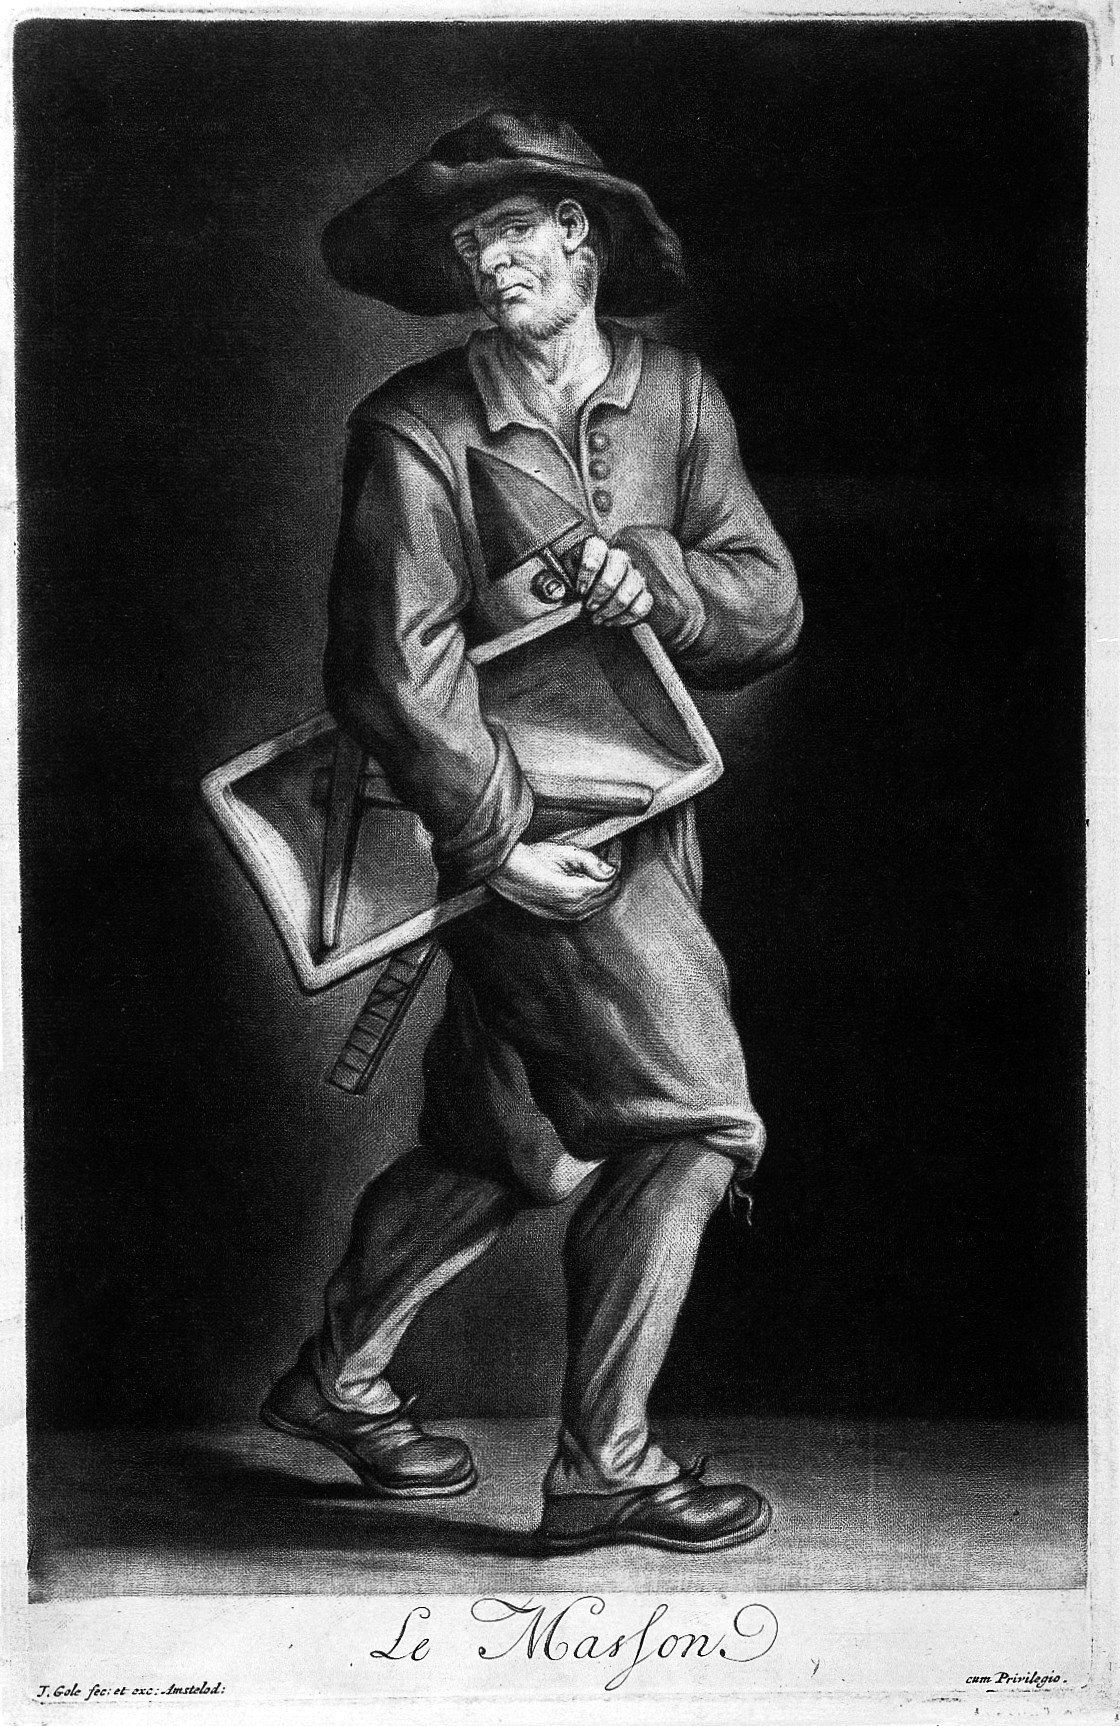 Black and white mezzotint of an architect carrying the tools of his trade, including some sort of ruler and a plumb bob. The man appears sad.